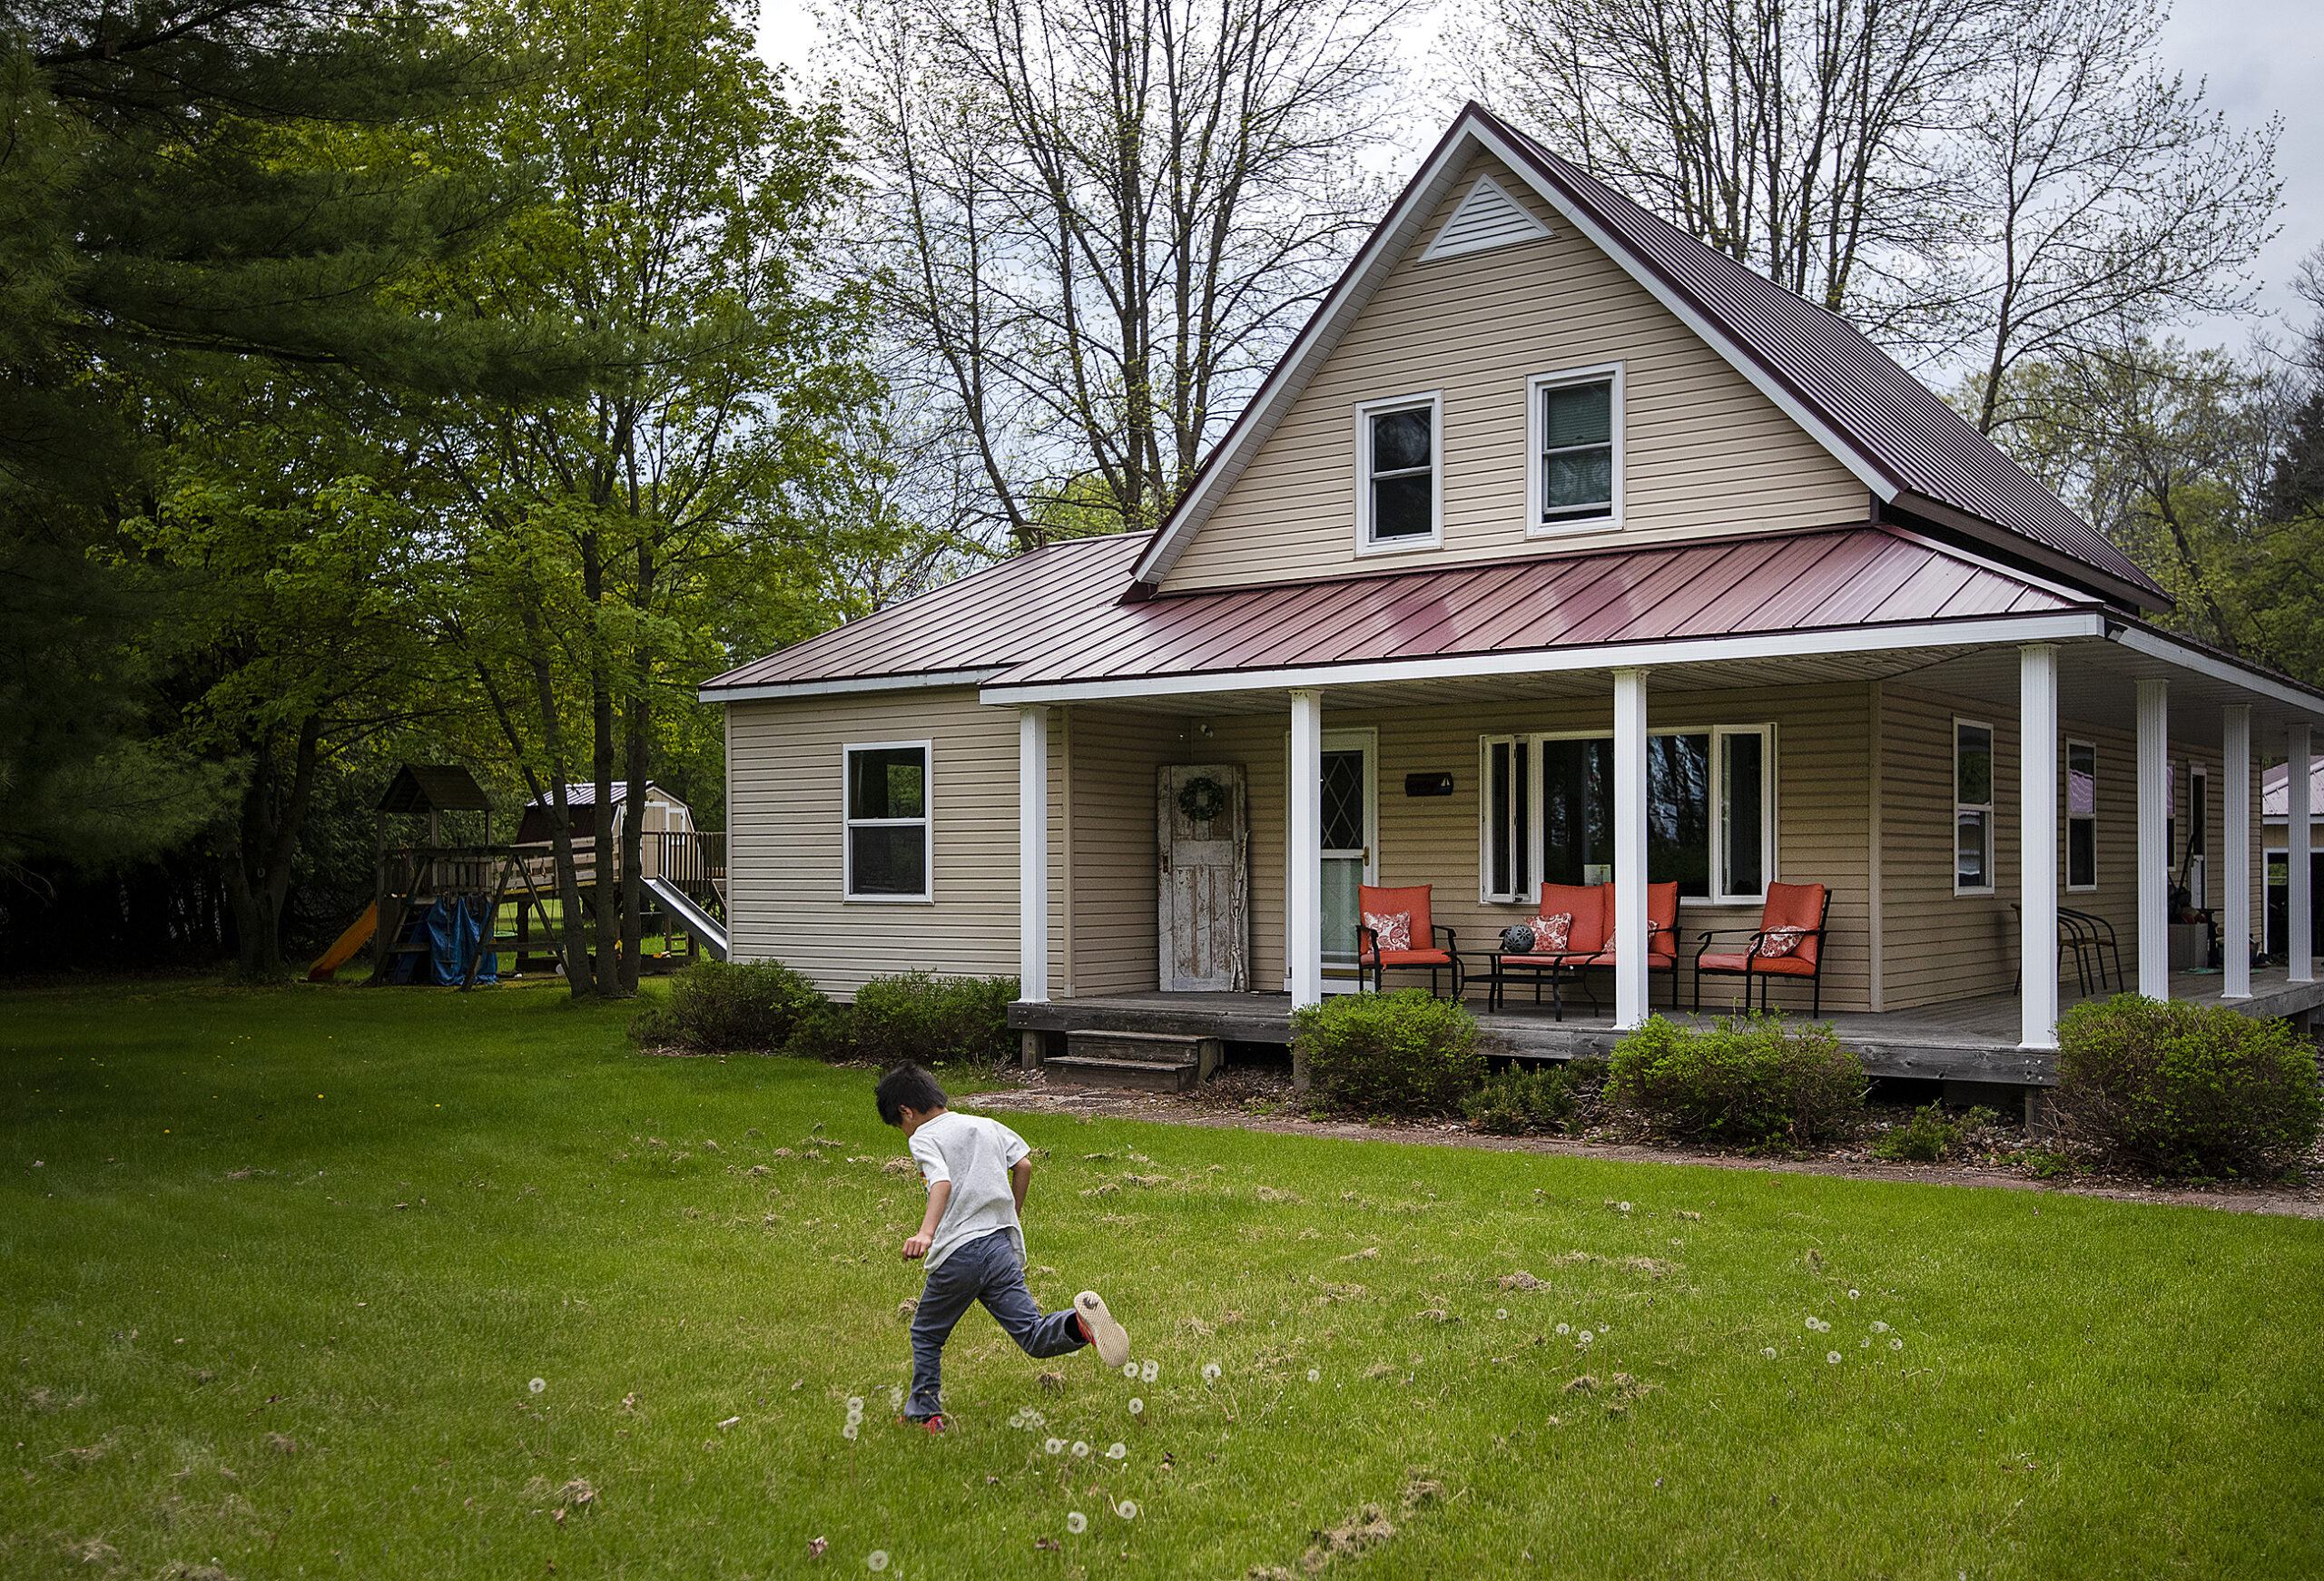 A child runs across a green lawn in front of a home with a wrap-around porch.